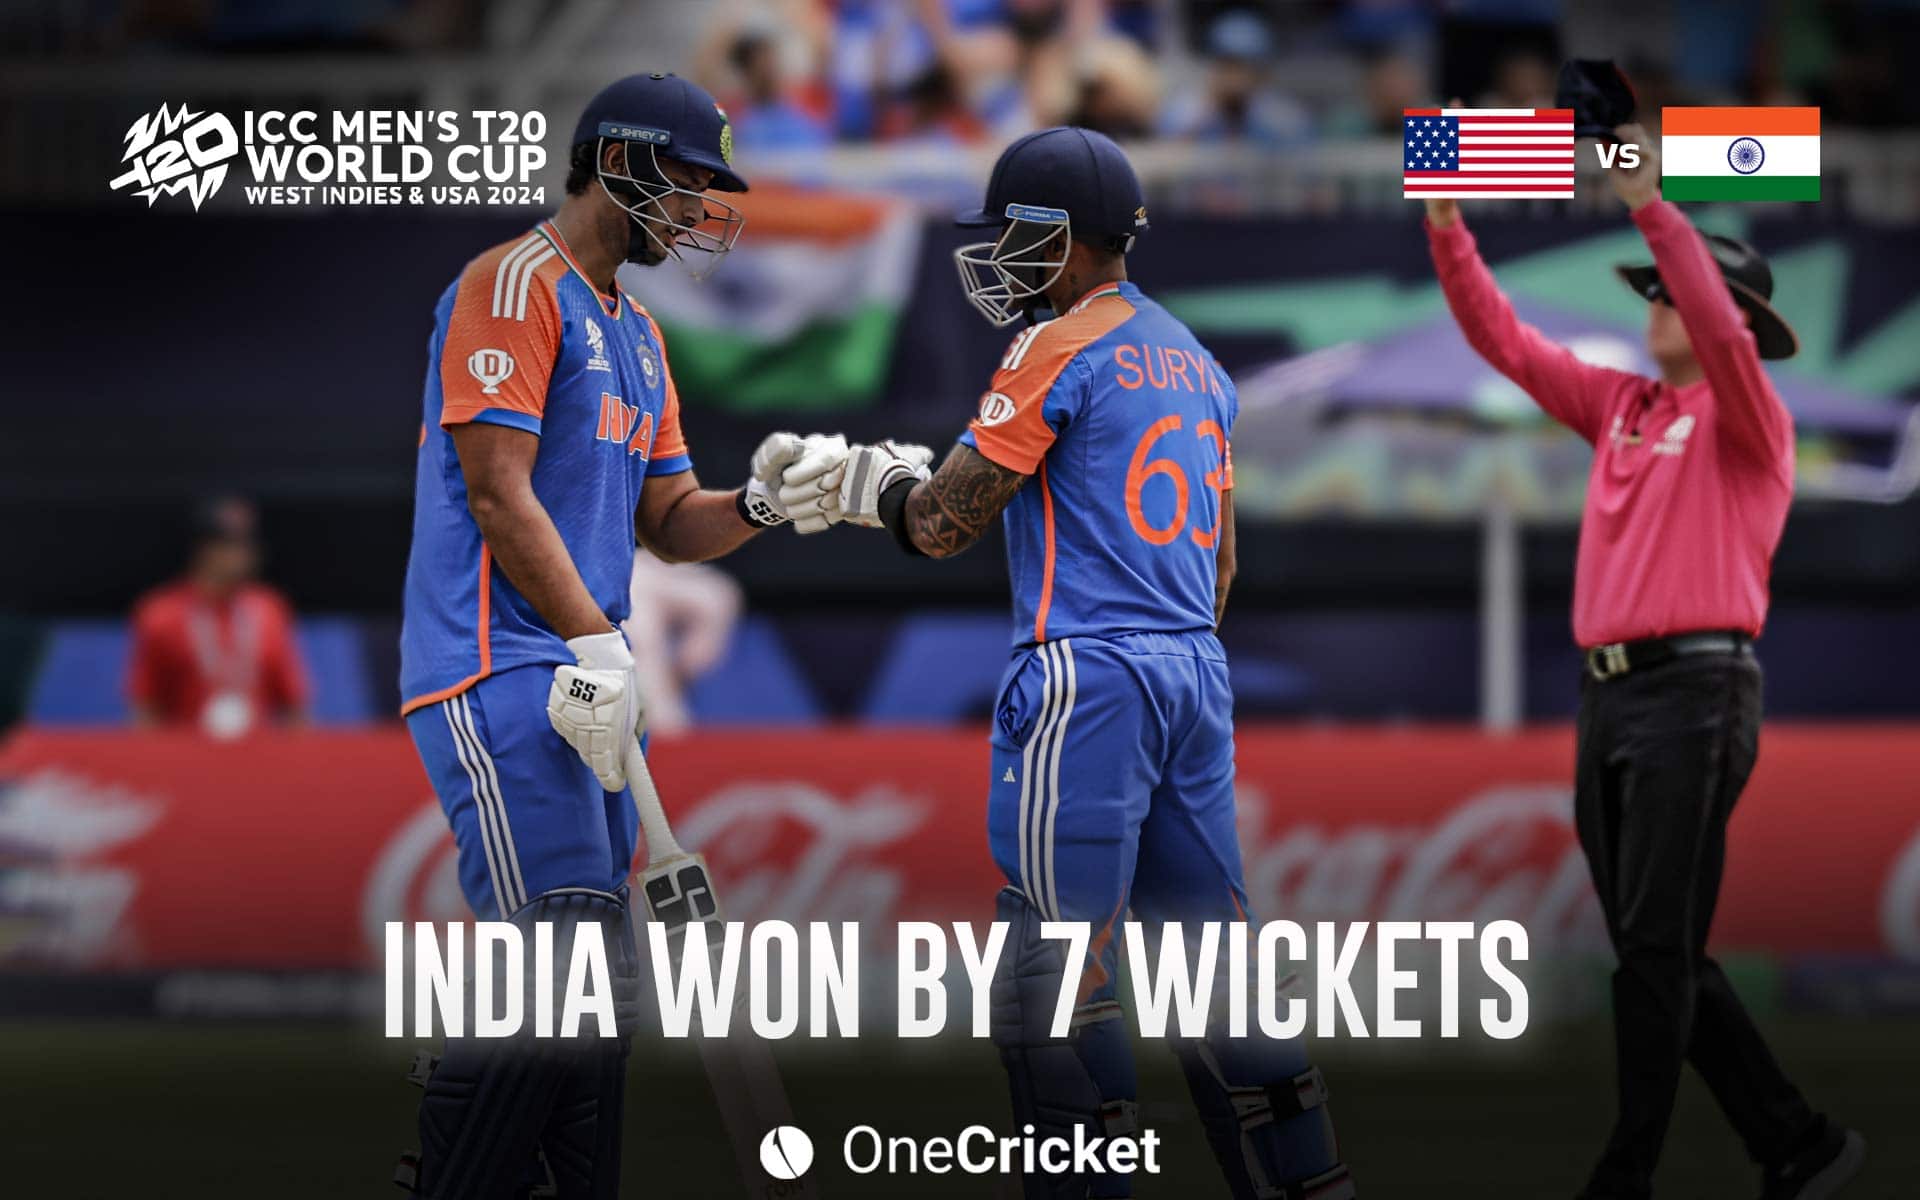 India qualify for Super 8 of T20 WC 2024 (OneCricket)